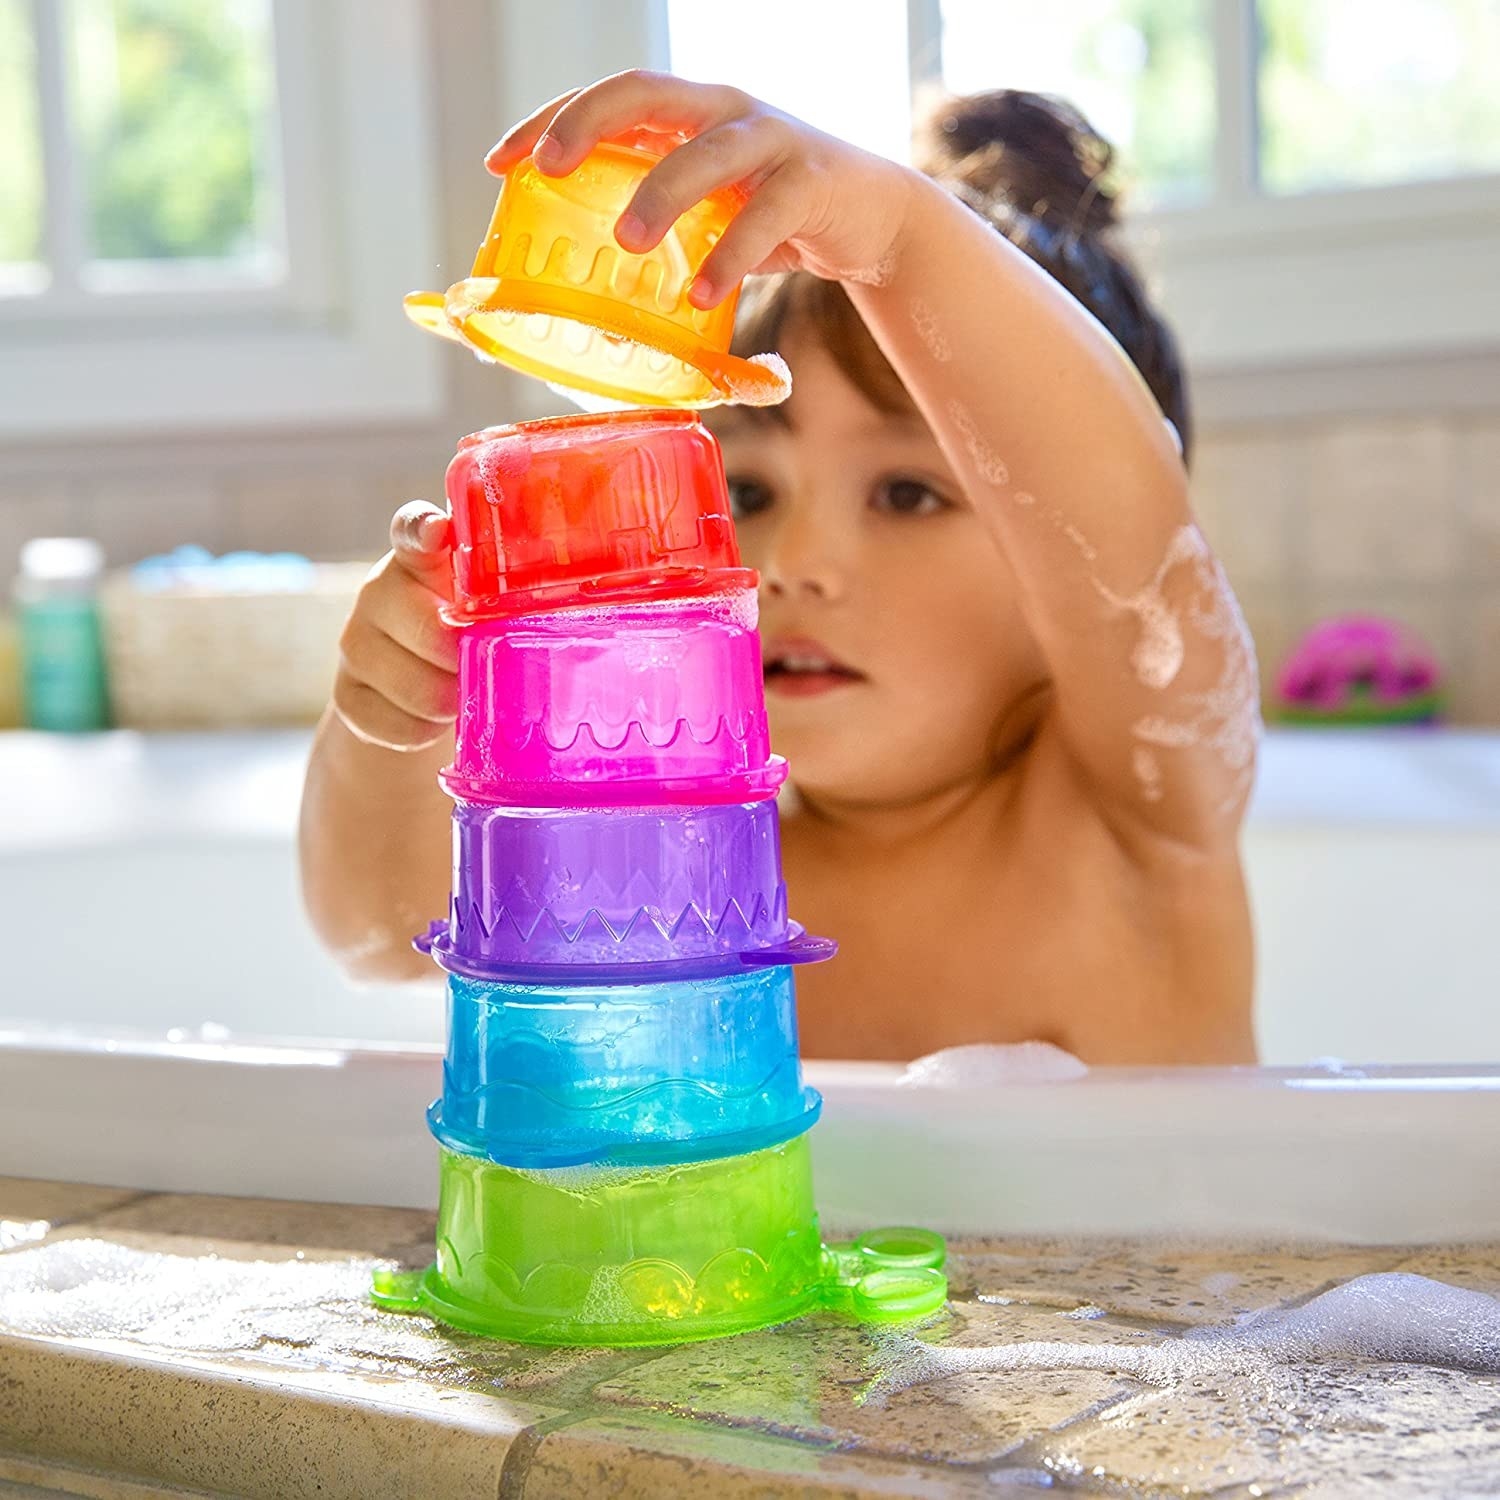 A kid stacking the cups on the edge of a bath